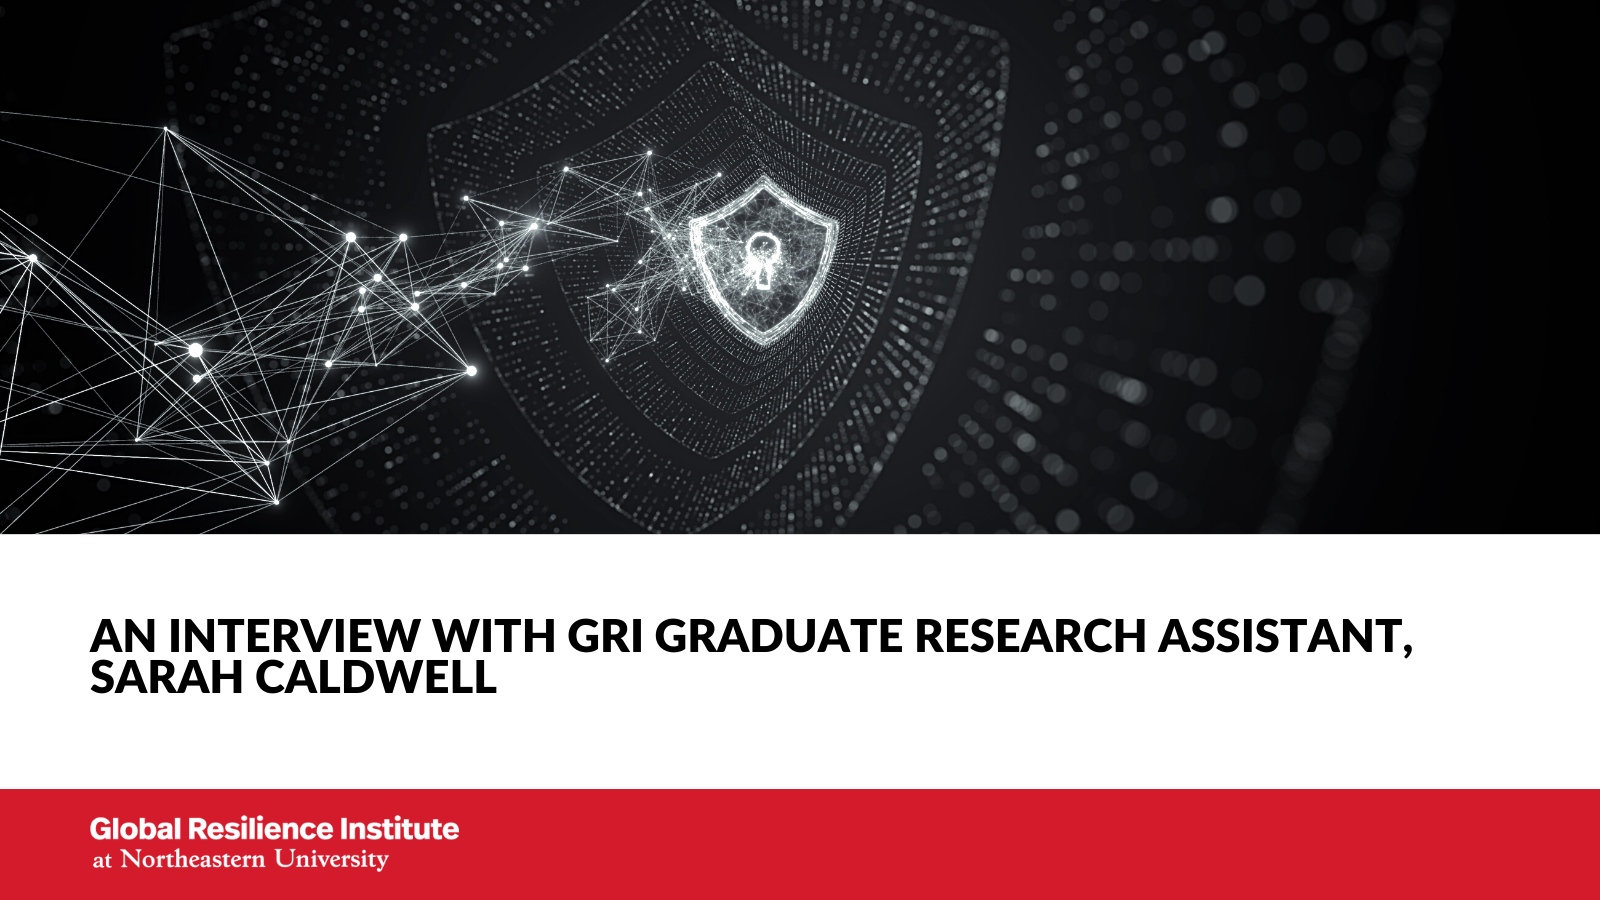 An Interview with GRI Graduate Research Assistant, Sarah Caldwell